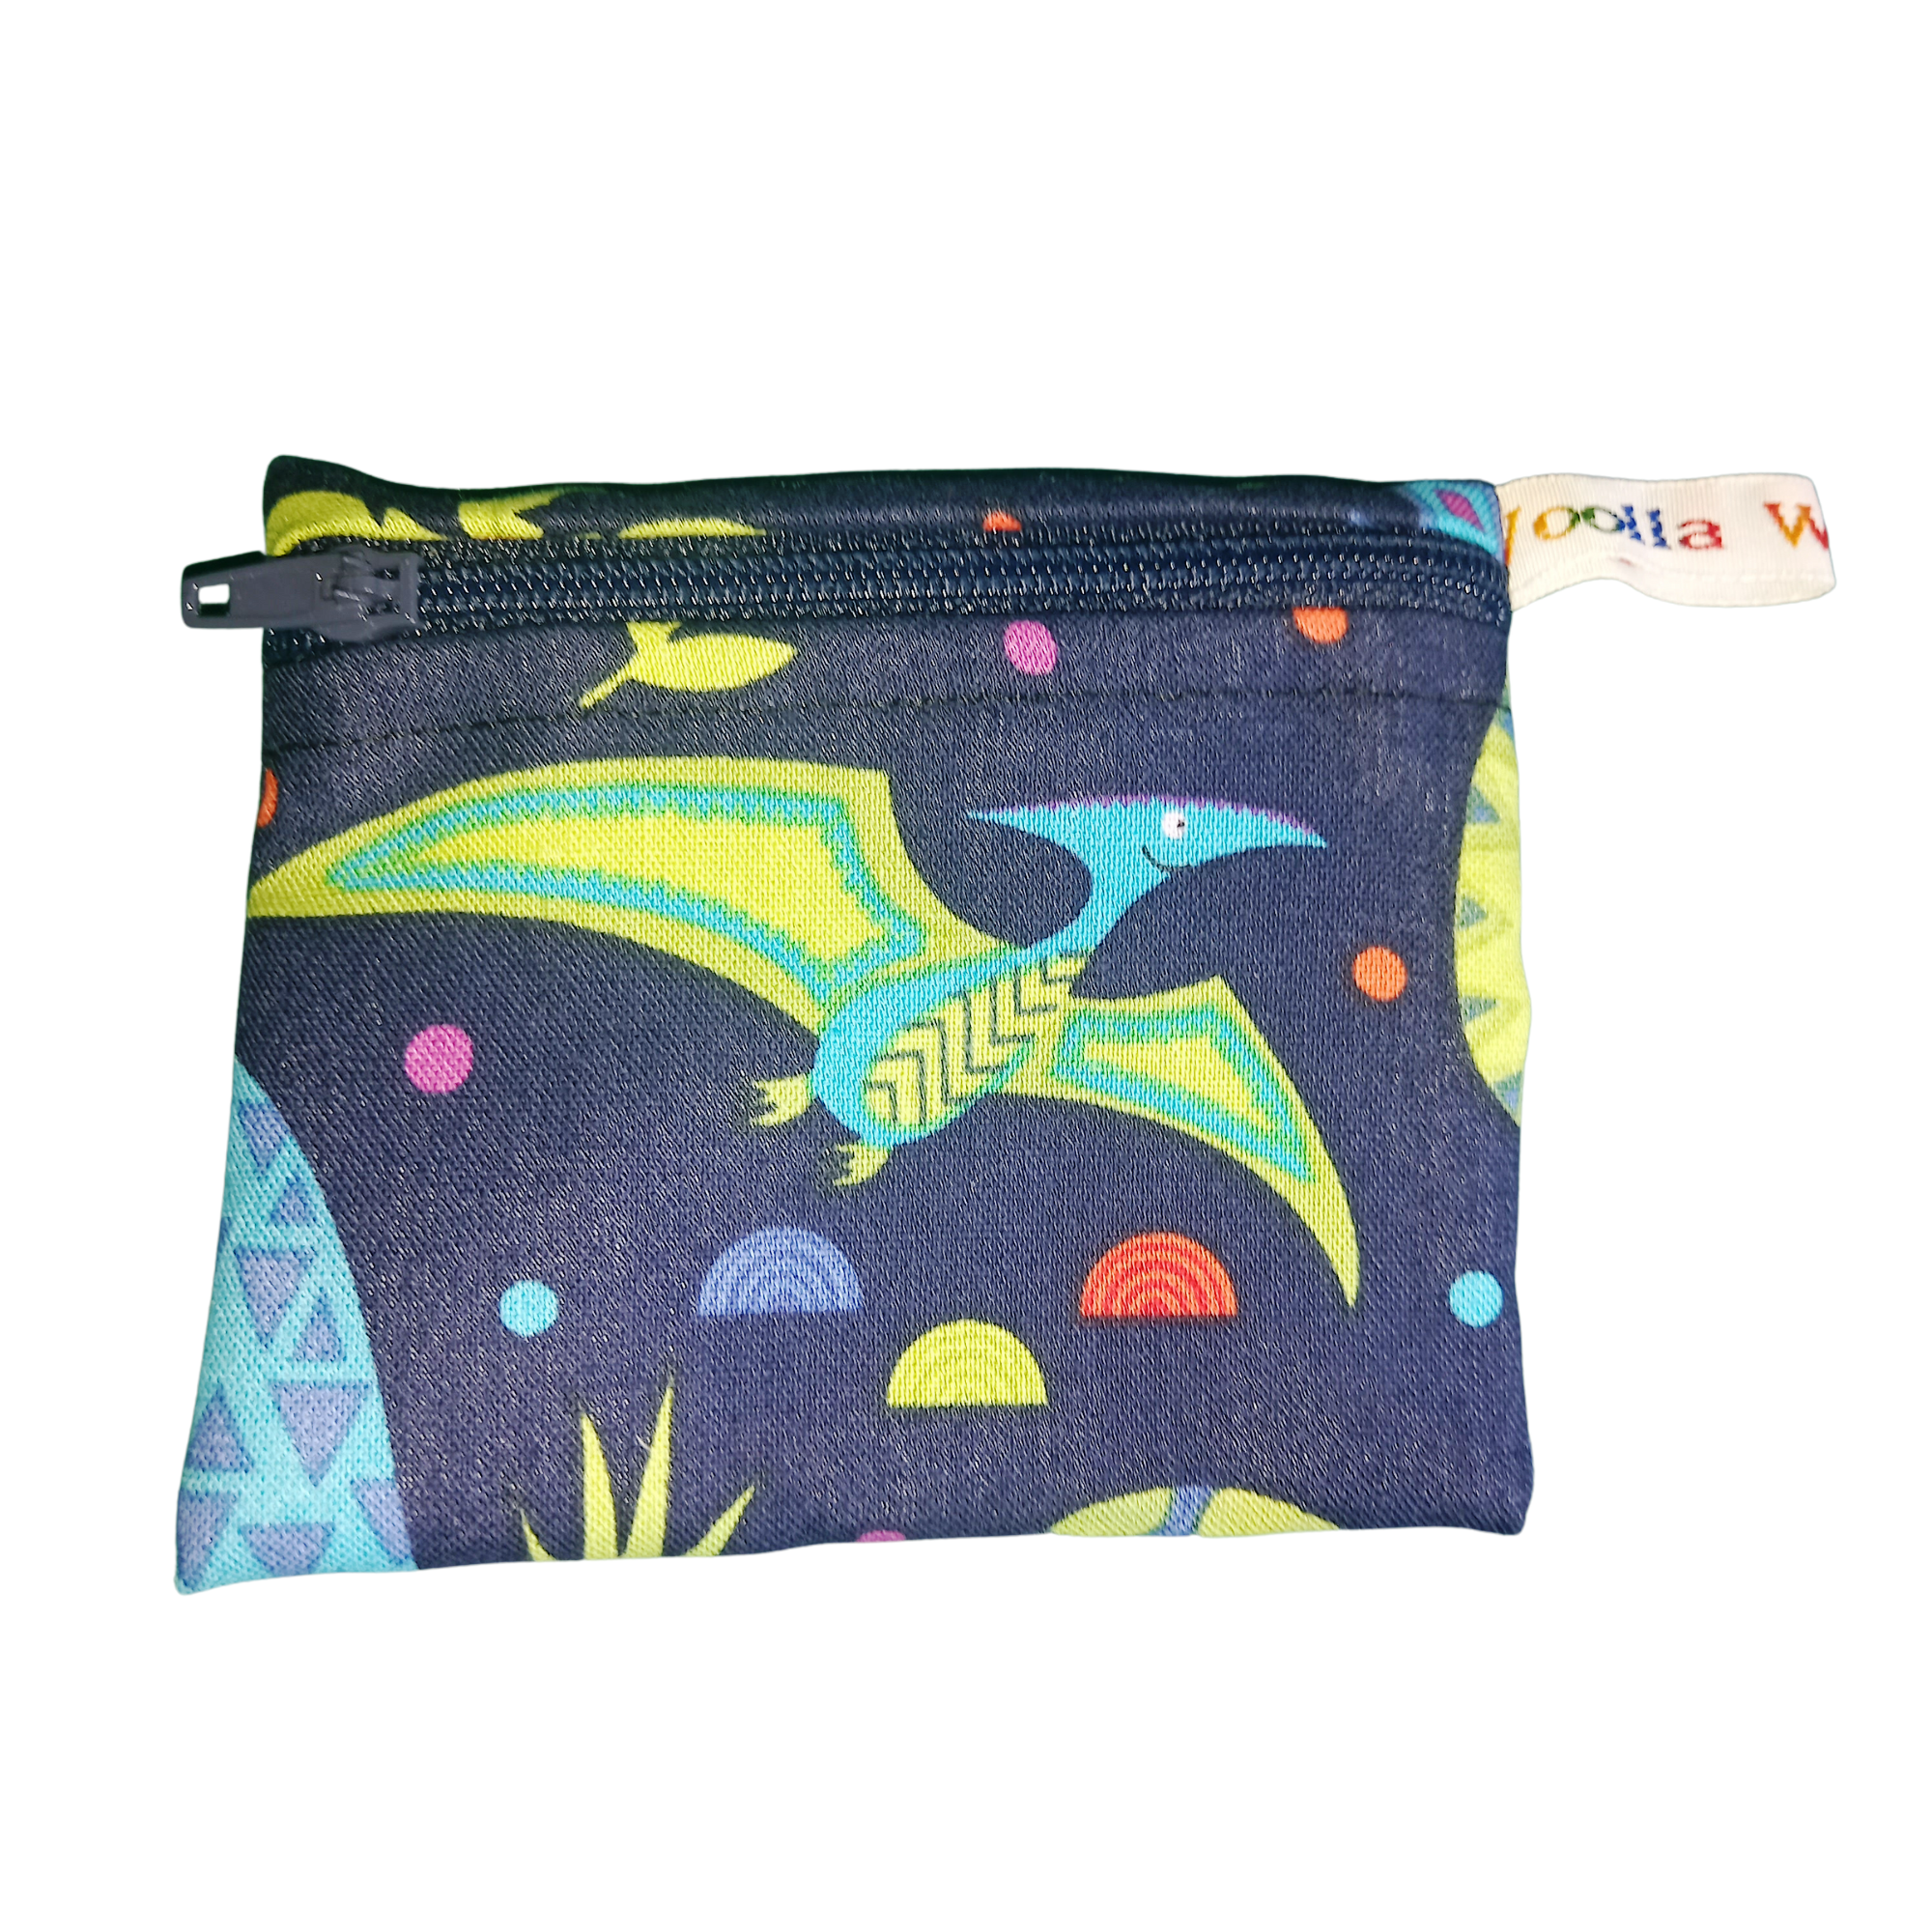 Bright Dinosaur - Snack Bag - Small Pippins Waterproof Pouch for Food, Makeup and more, Eco-Friendly and Washable Lunch, Travel, and Storage